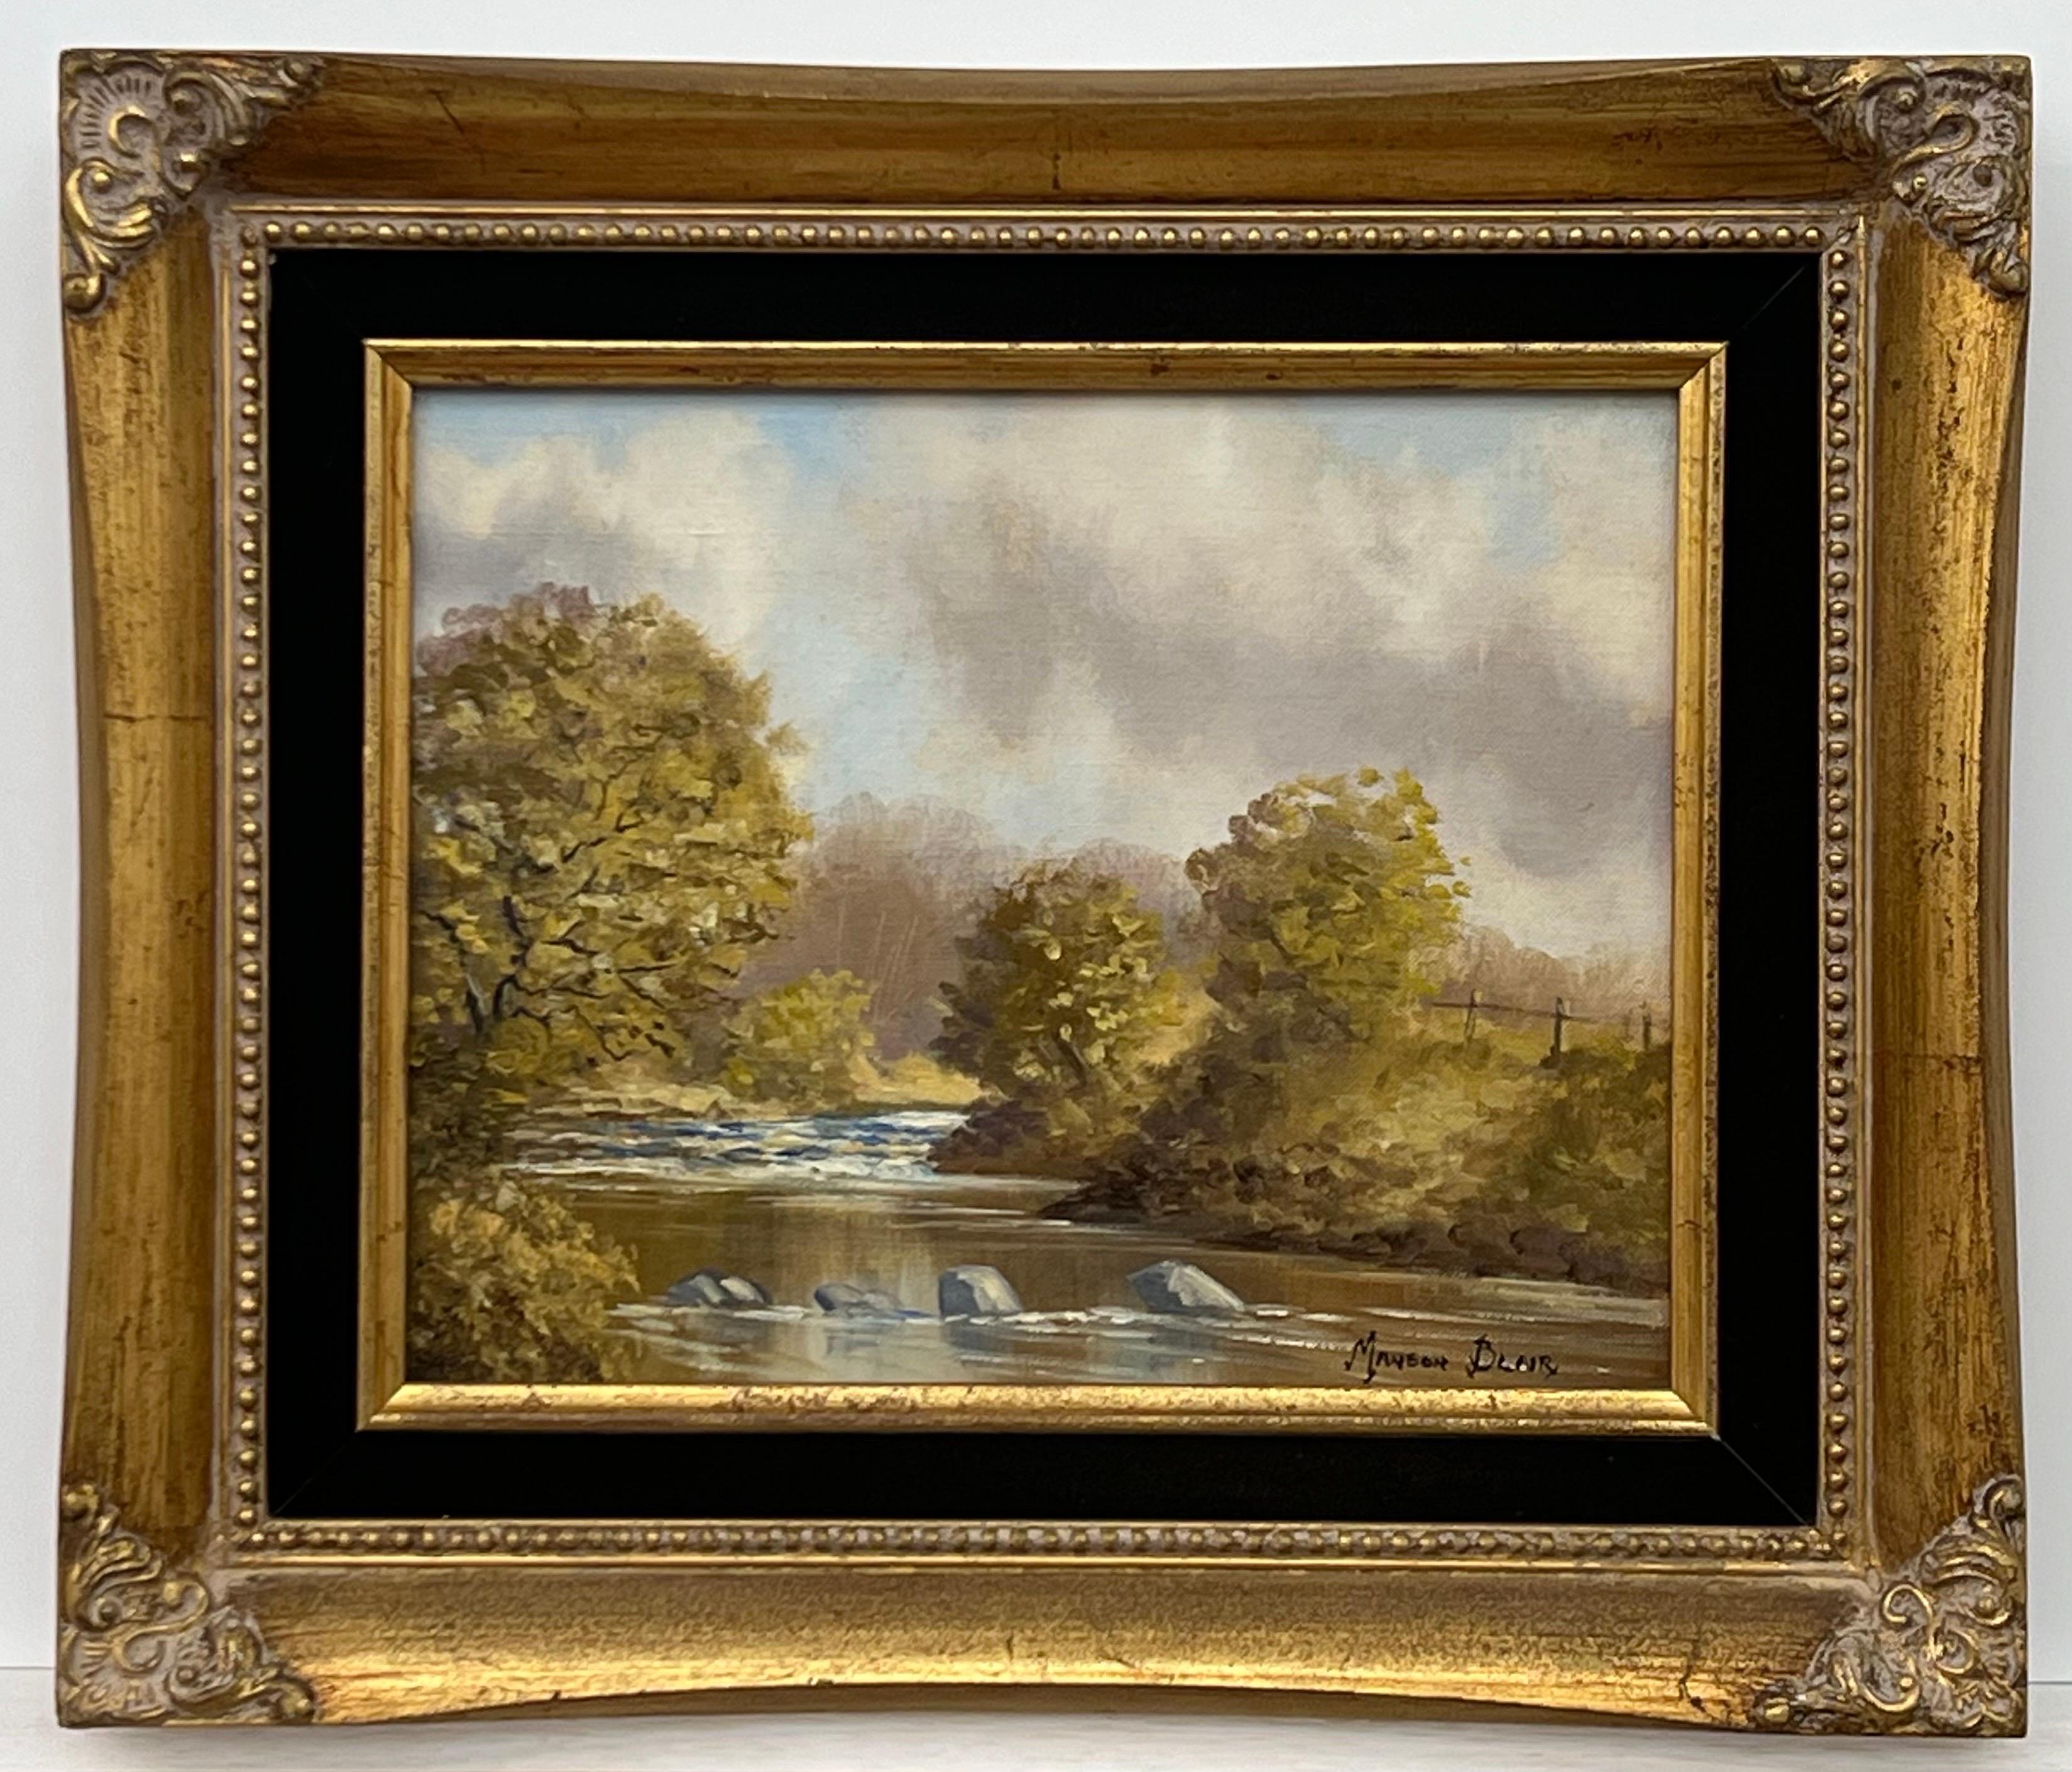 Original Oil Painting of a River Landscape in County Tyrone, Ireland, by Irish Artist, Manson Blair. Presented in the original ornate frame. 

Art measures 10 x 8 inches 
Frame measures 14 x 12 inches 

Born in 1947 near Ballyclare in Northern